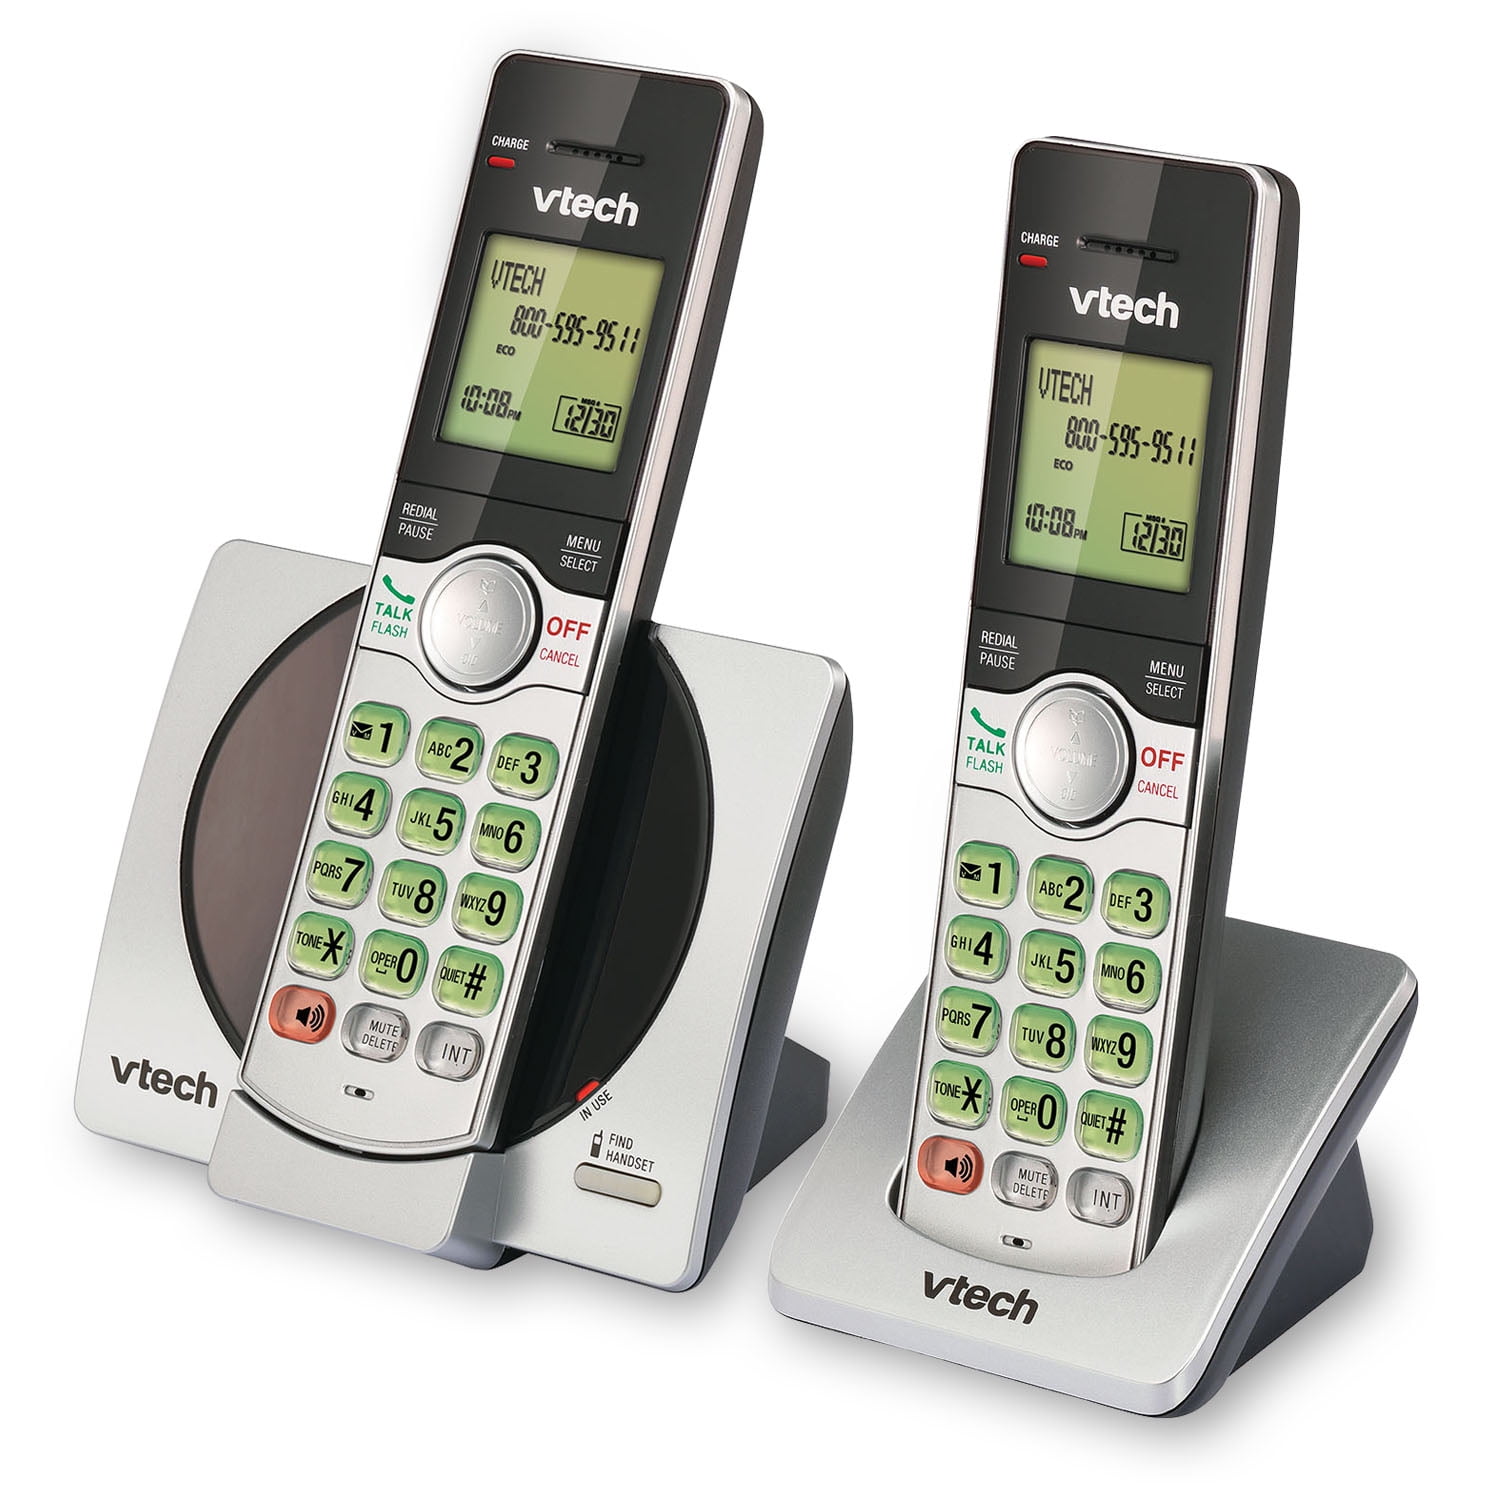 VTech CS6919-2 DECT 6.0 Cordless Phone with Caller ID and Handset  Speakerphone, 2 Handsets, Silver/Black